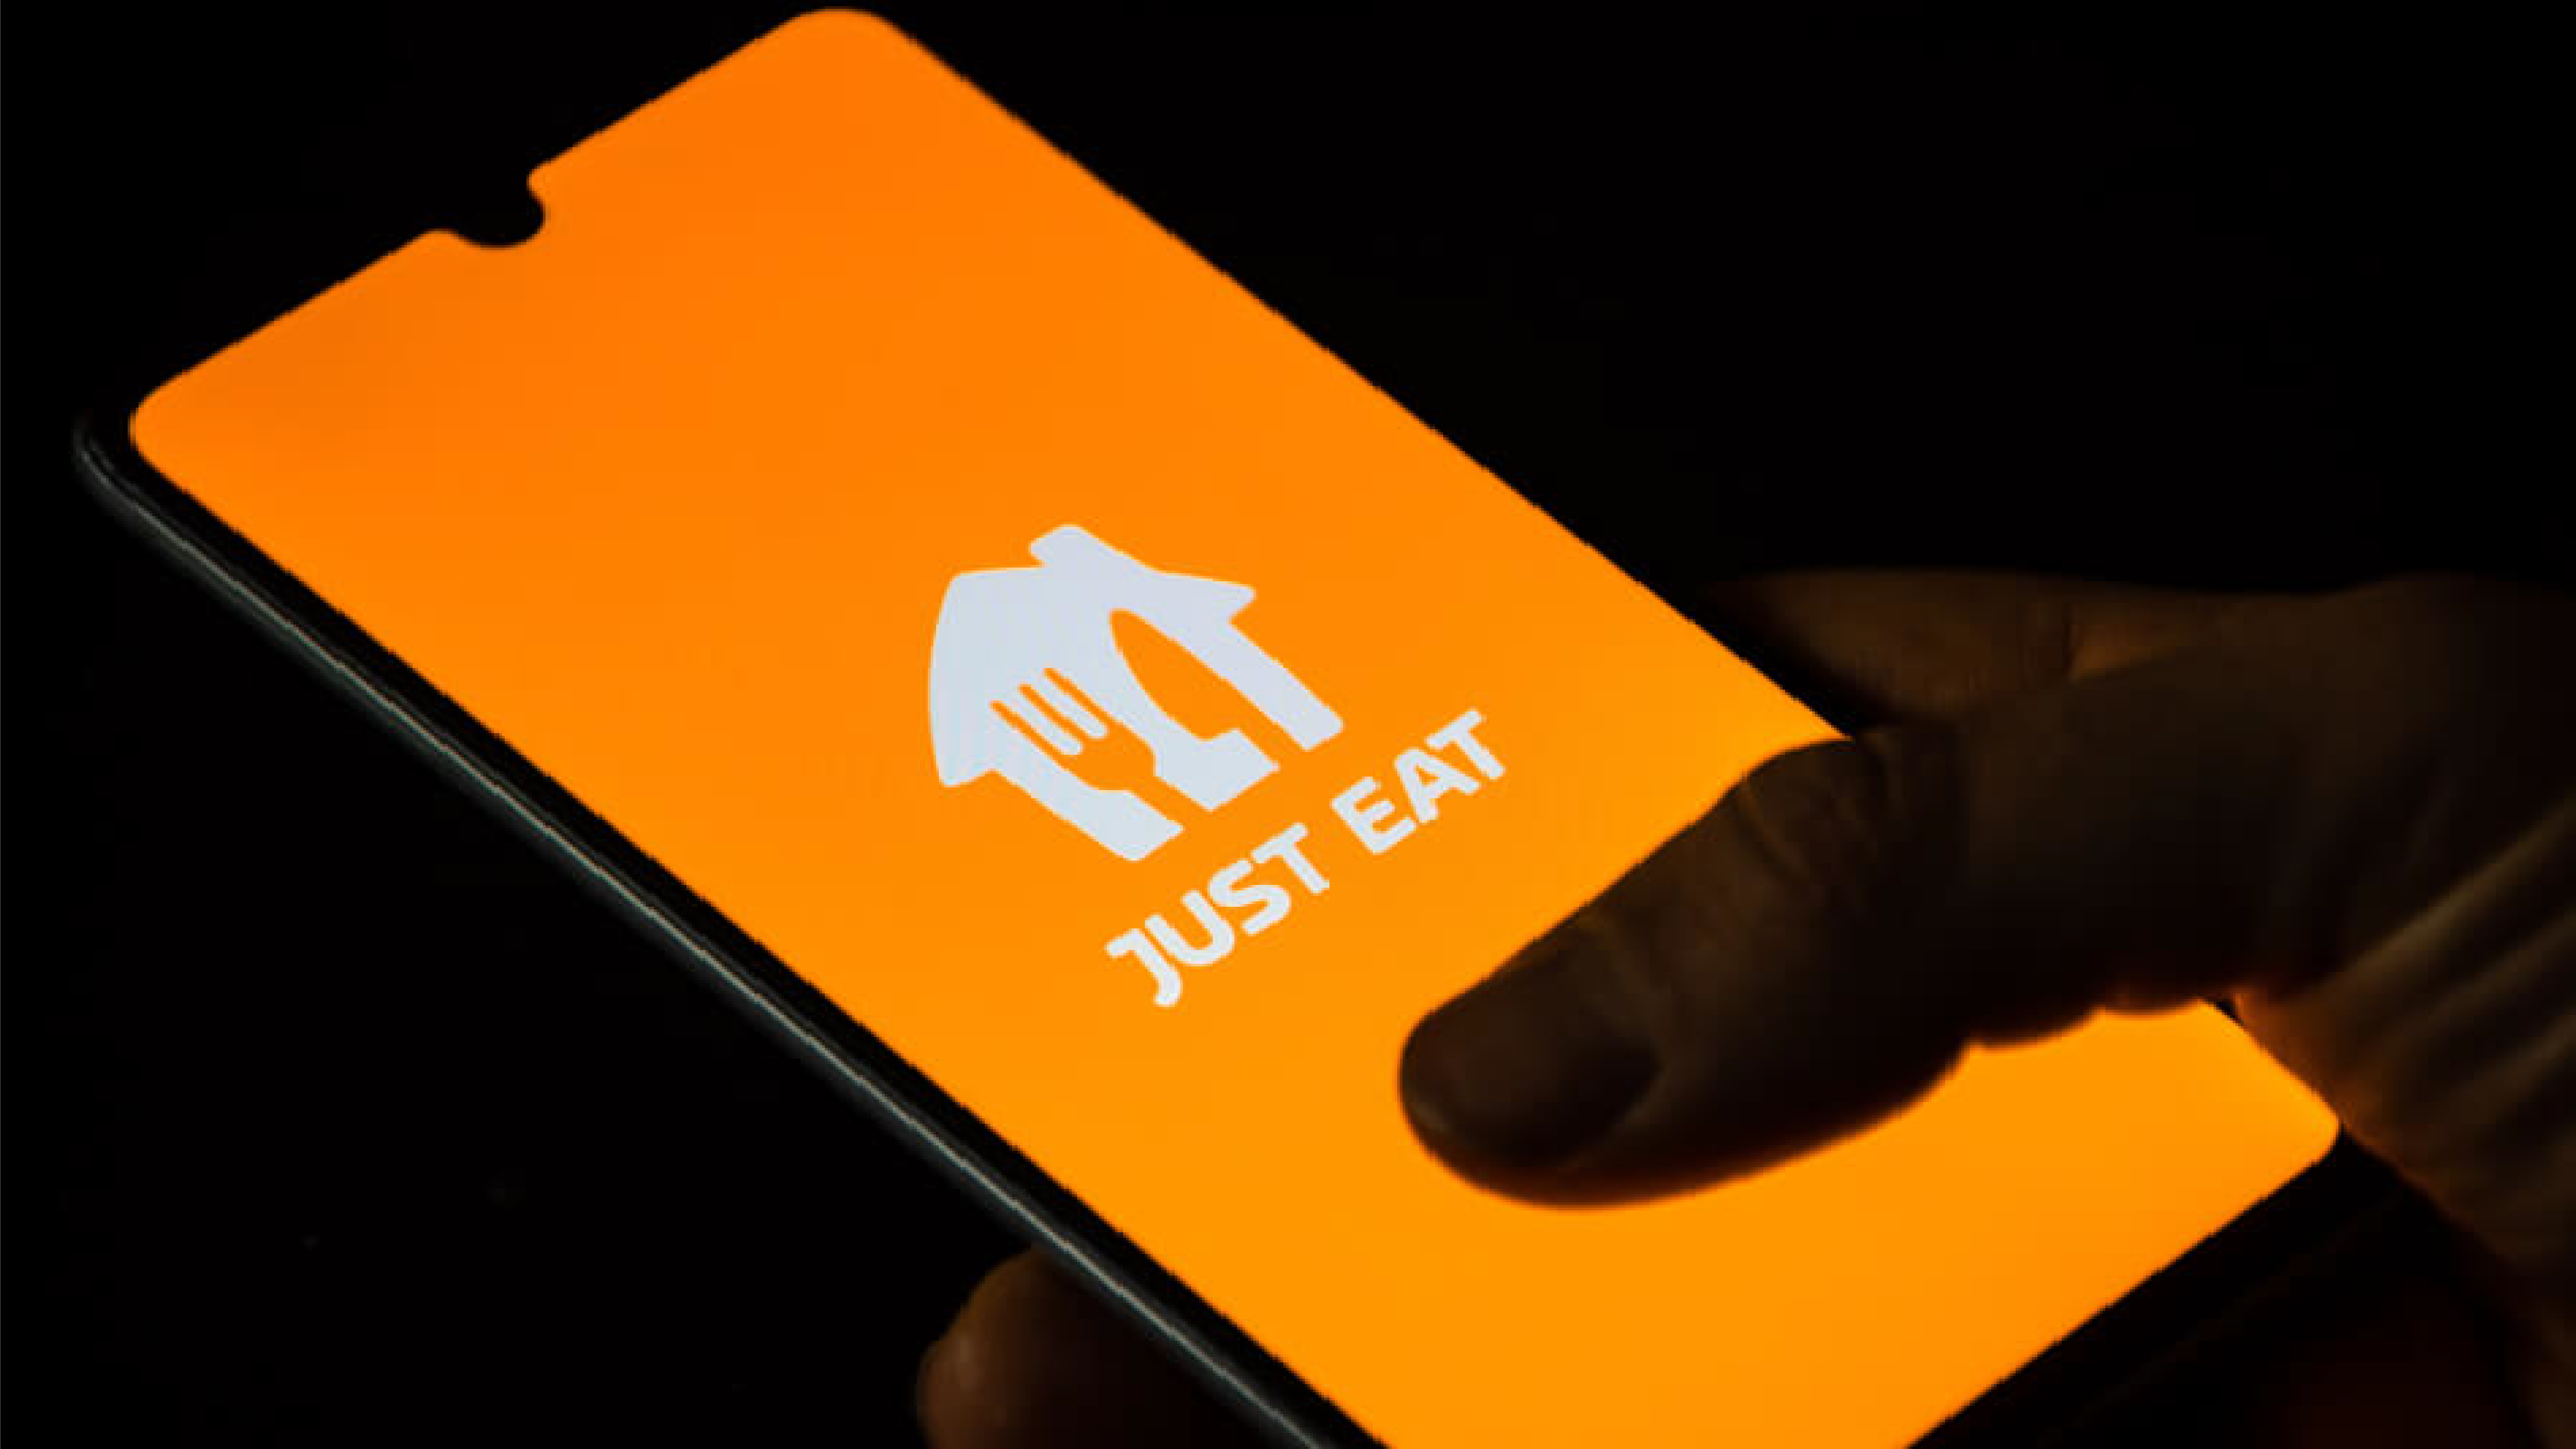 Smartphone with Just Eat logo on screen